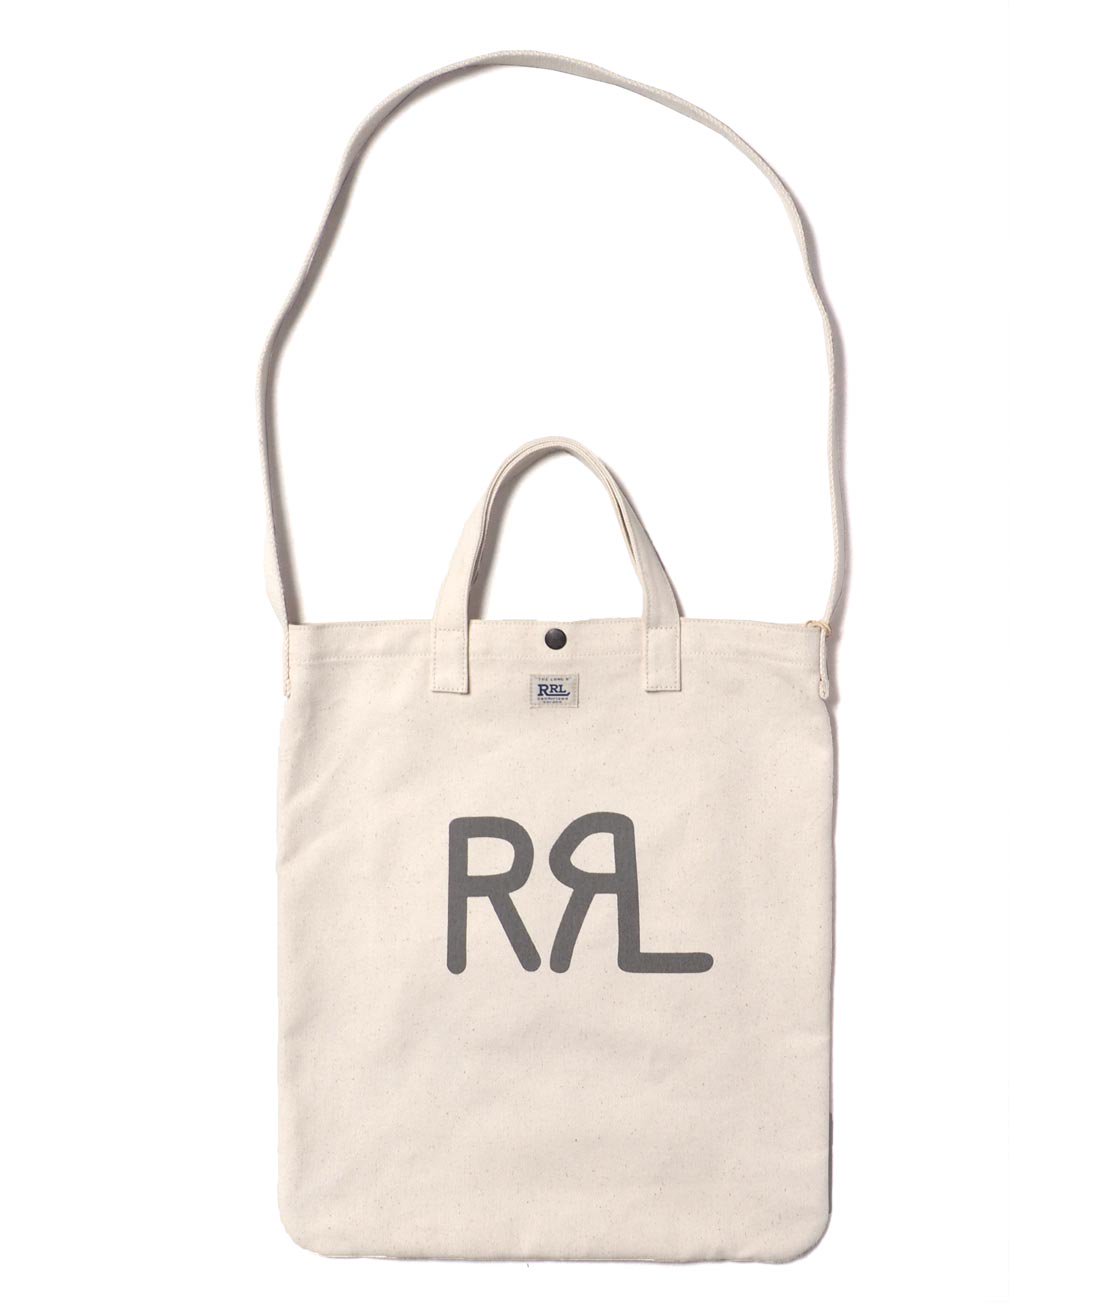 RRL】SEEDED CANVAS MARKET TOTE - NATURAL マーケットトート バッグ